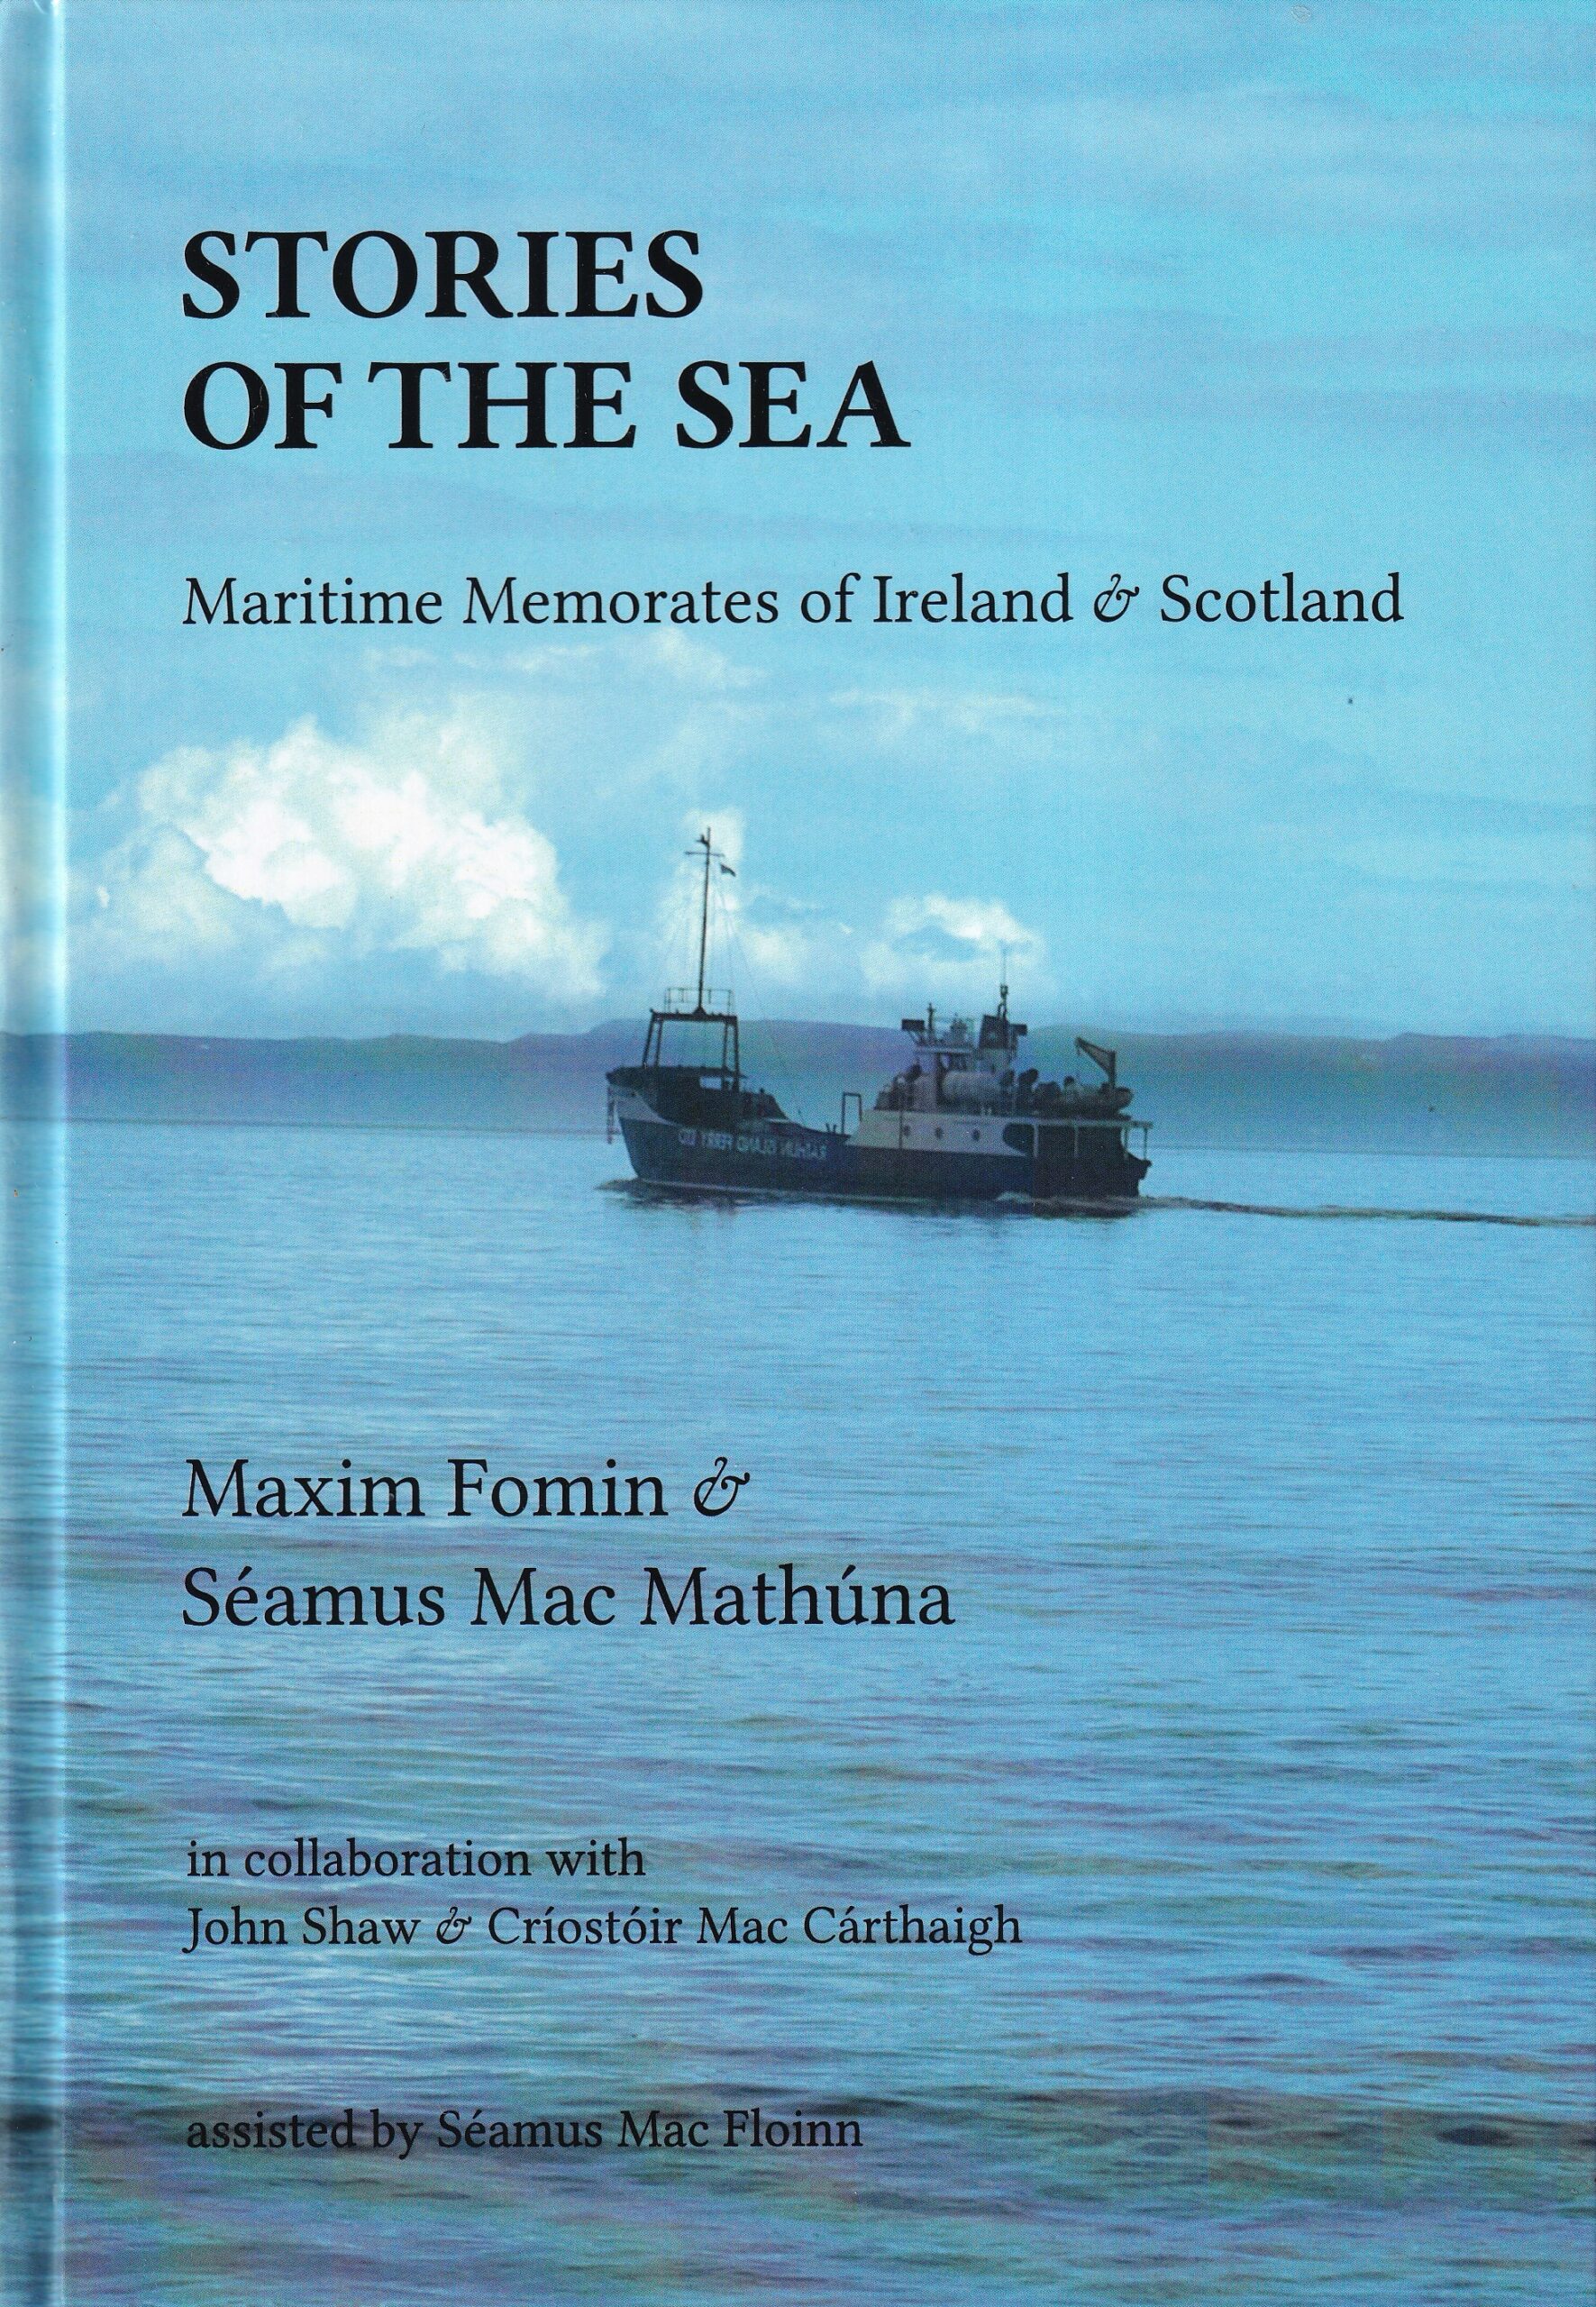 Stories of the Sea: Maritime Memorates of Ireland and Scotland by Maxim Fomin and Séamus Mac Mathúna